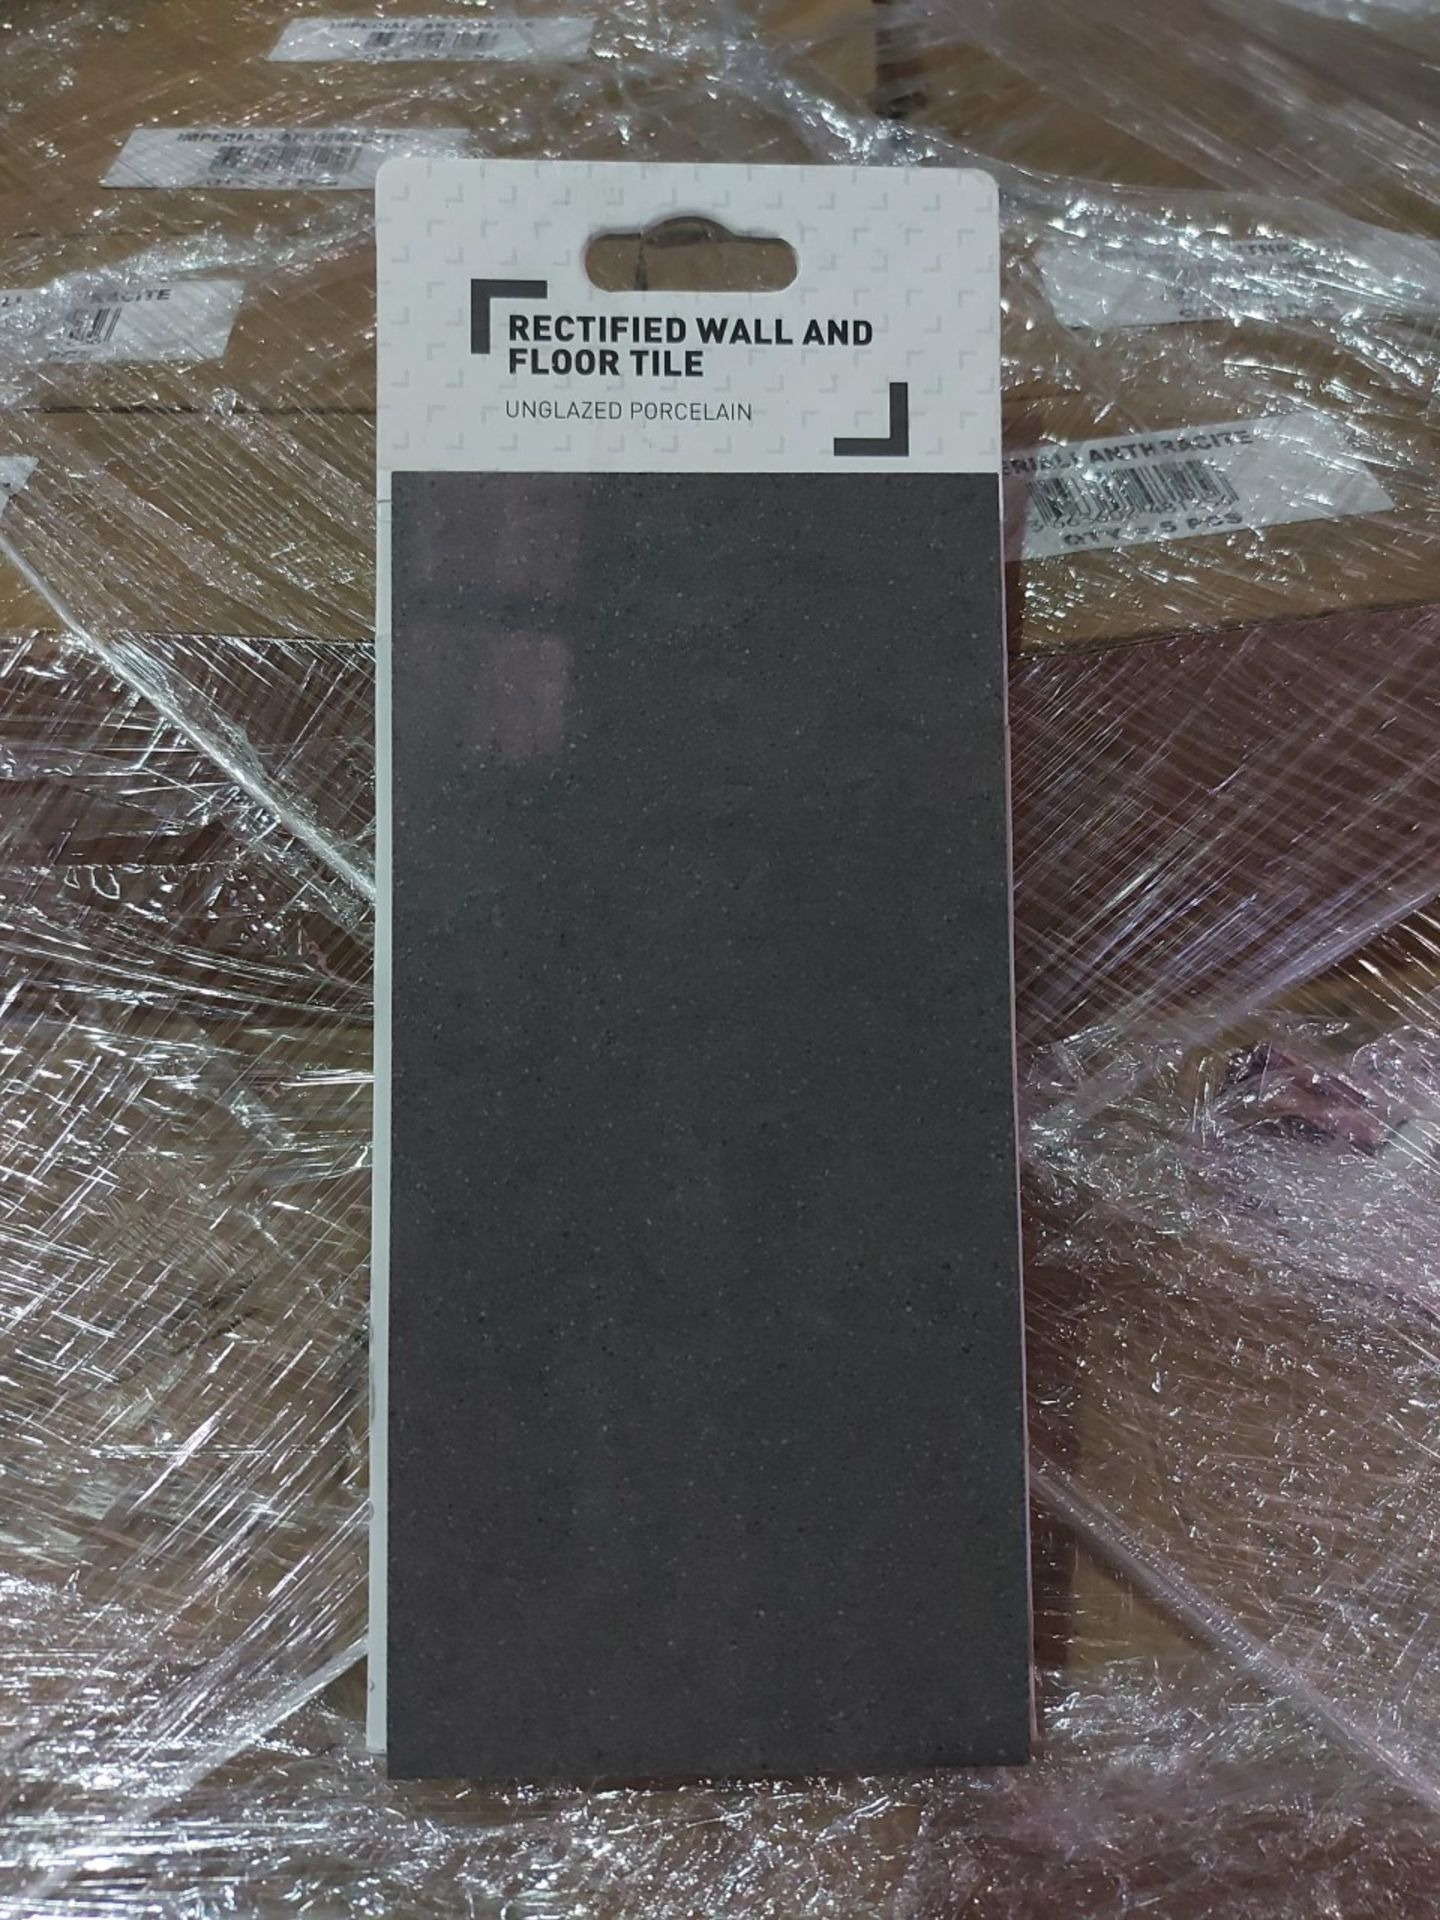 (F23) PALLET TO CONTAIN 800 x IMPERIALI ANTHRACITE RECTIFIED WALL AND FLOOR TILE PORCELAIN. SAMPLES